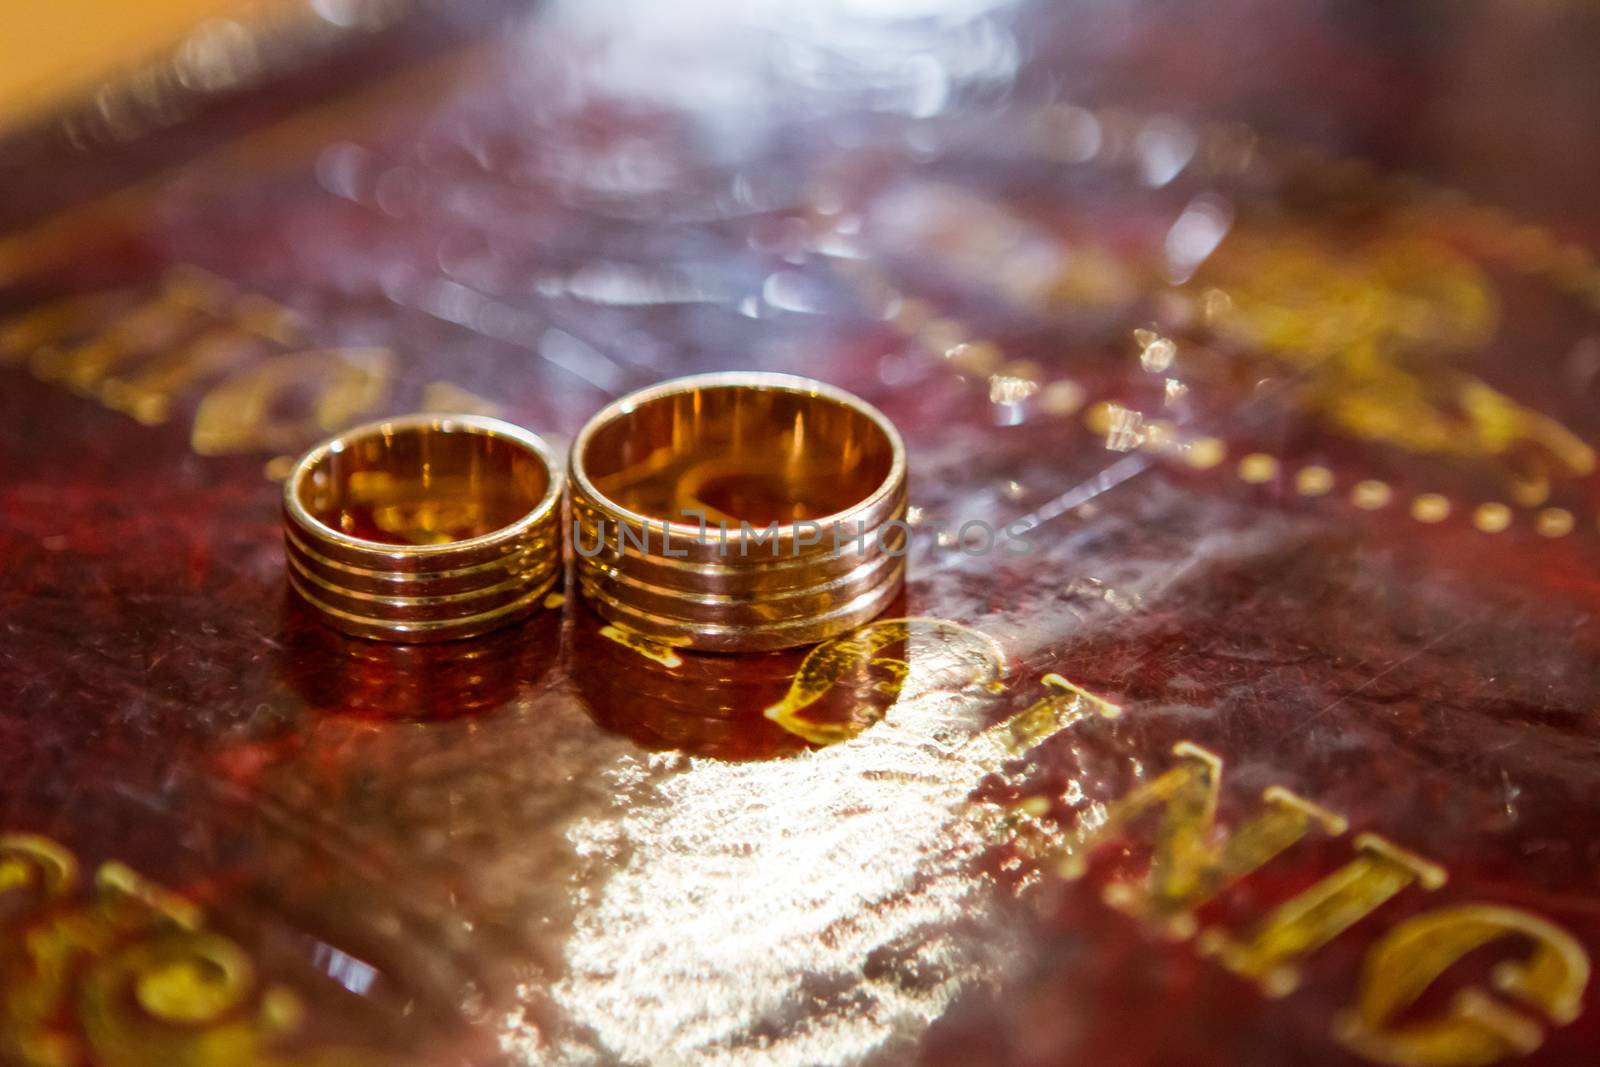 Wedding rings on bible, on church altar by Angel_a